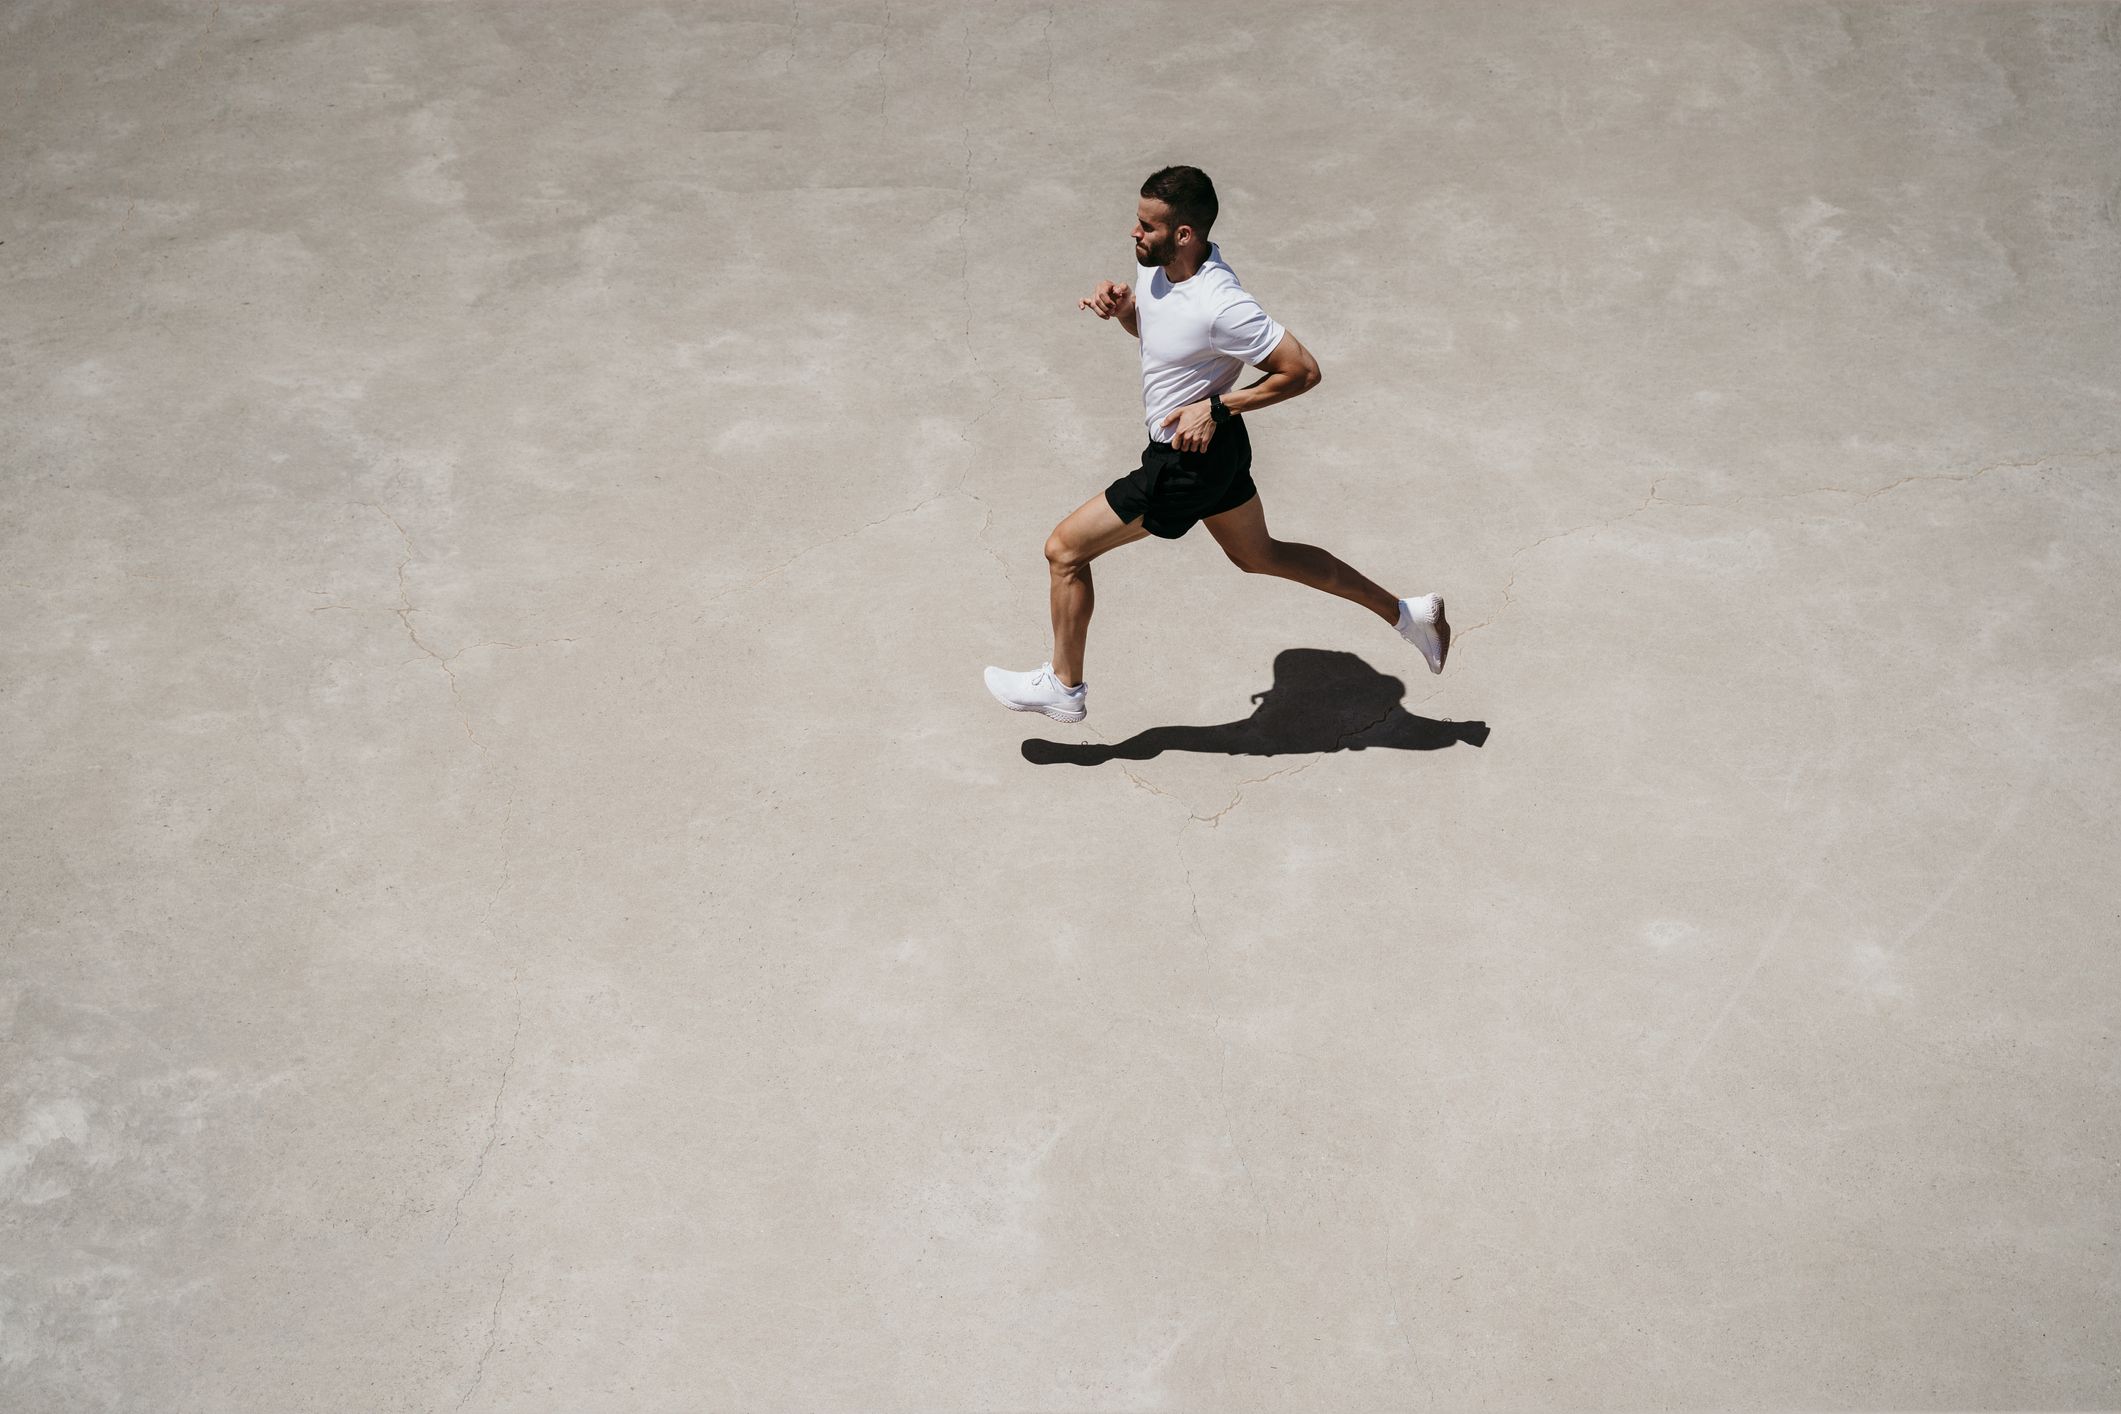 Running 20 Minutes A Day: Benefits + 3 Tips To Maximize Your Sessions